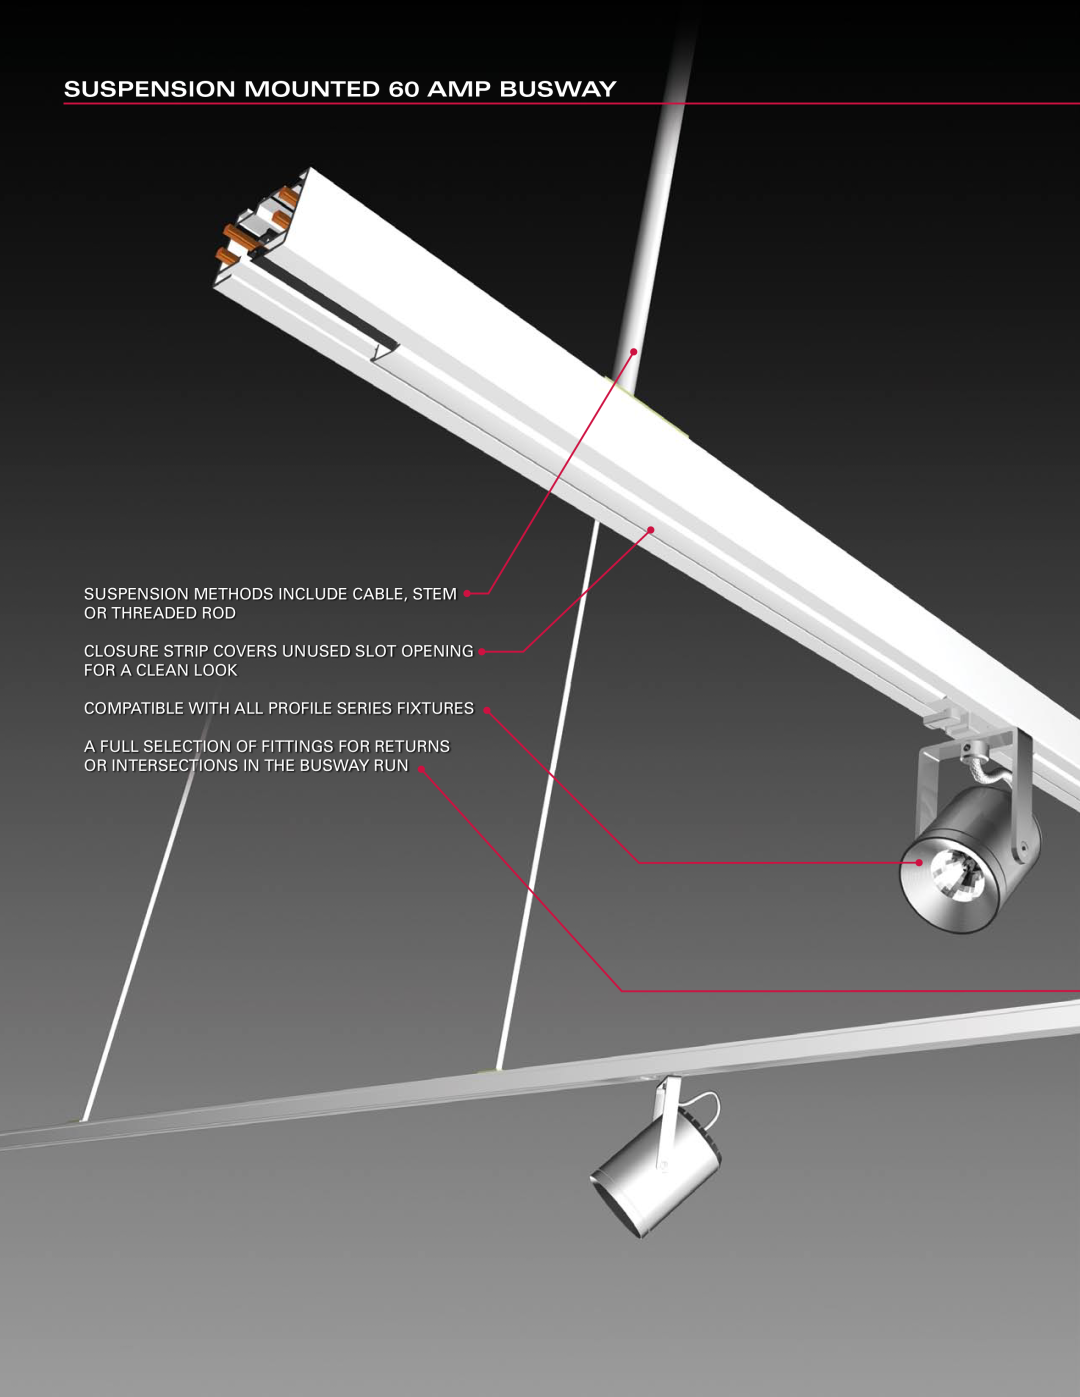 Profile SUSPENSION MOUNTED 60 AMP BUSWAY, Suspension Methods Include Cable, Stem, Or Threaded Rod, For A Clean Look 